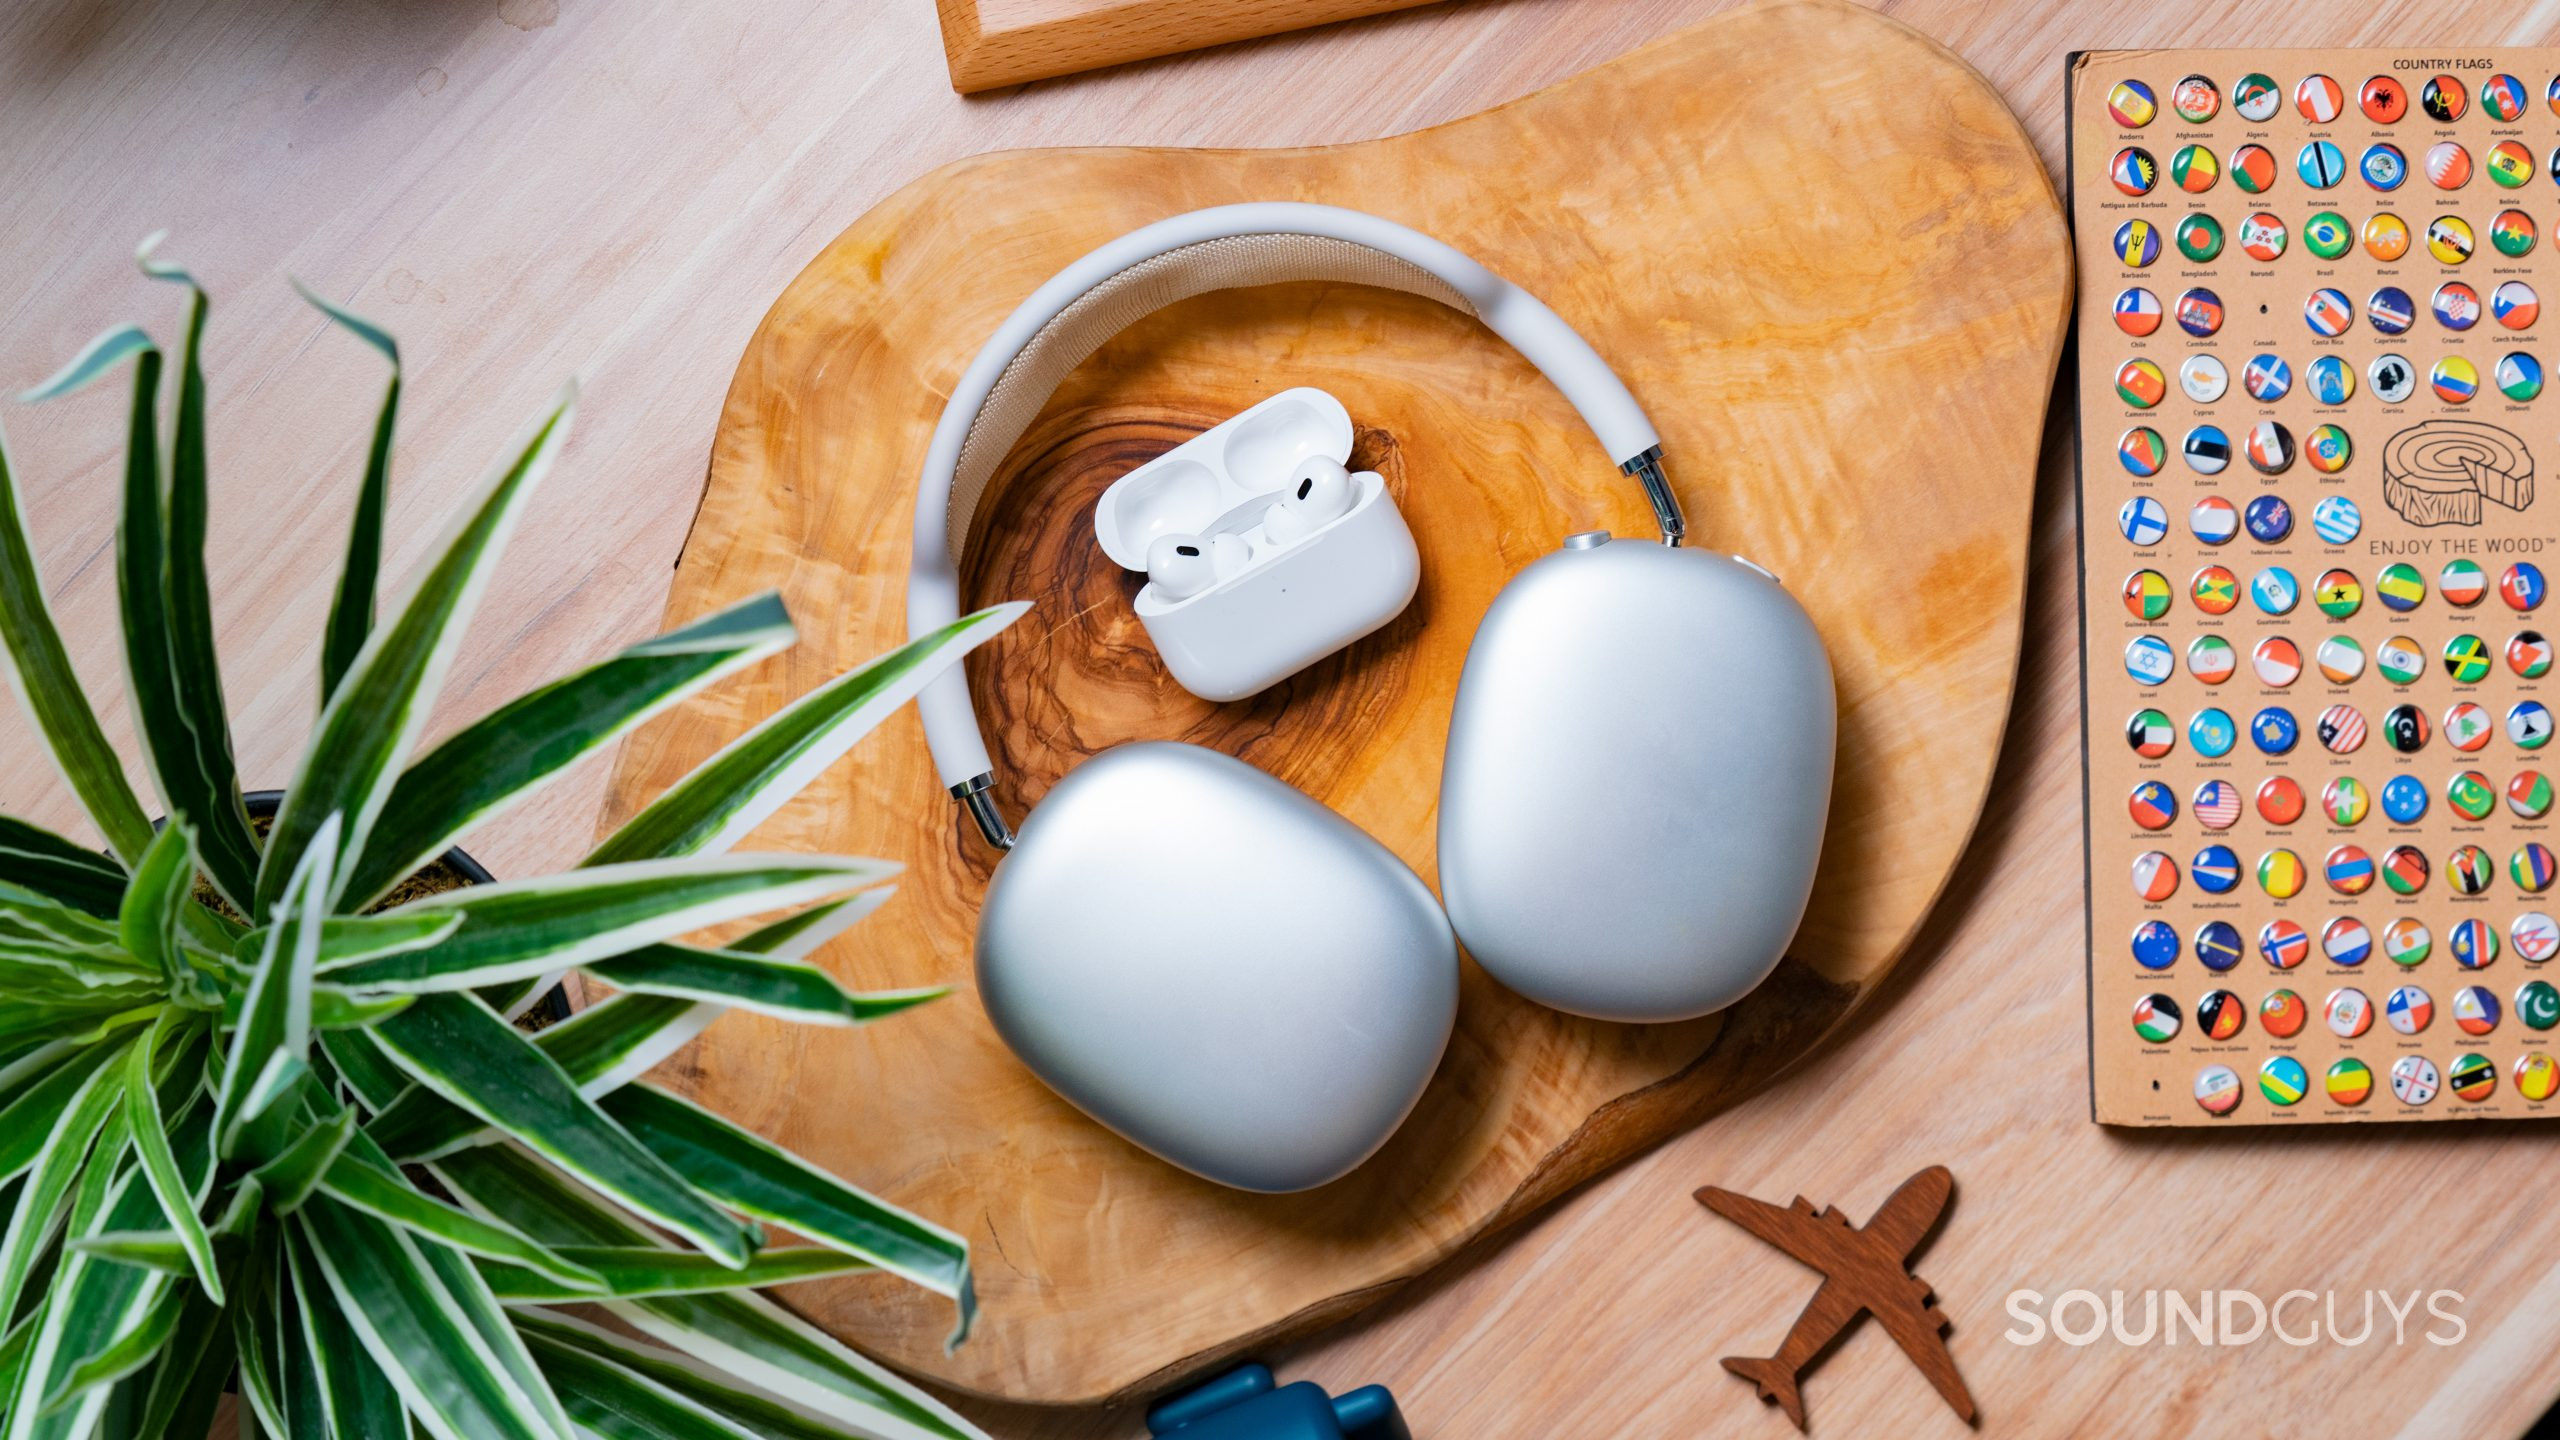 The Apple AirPods Max and Apple AirPods Pro (2nd generation) together on a wooden slab.